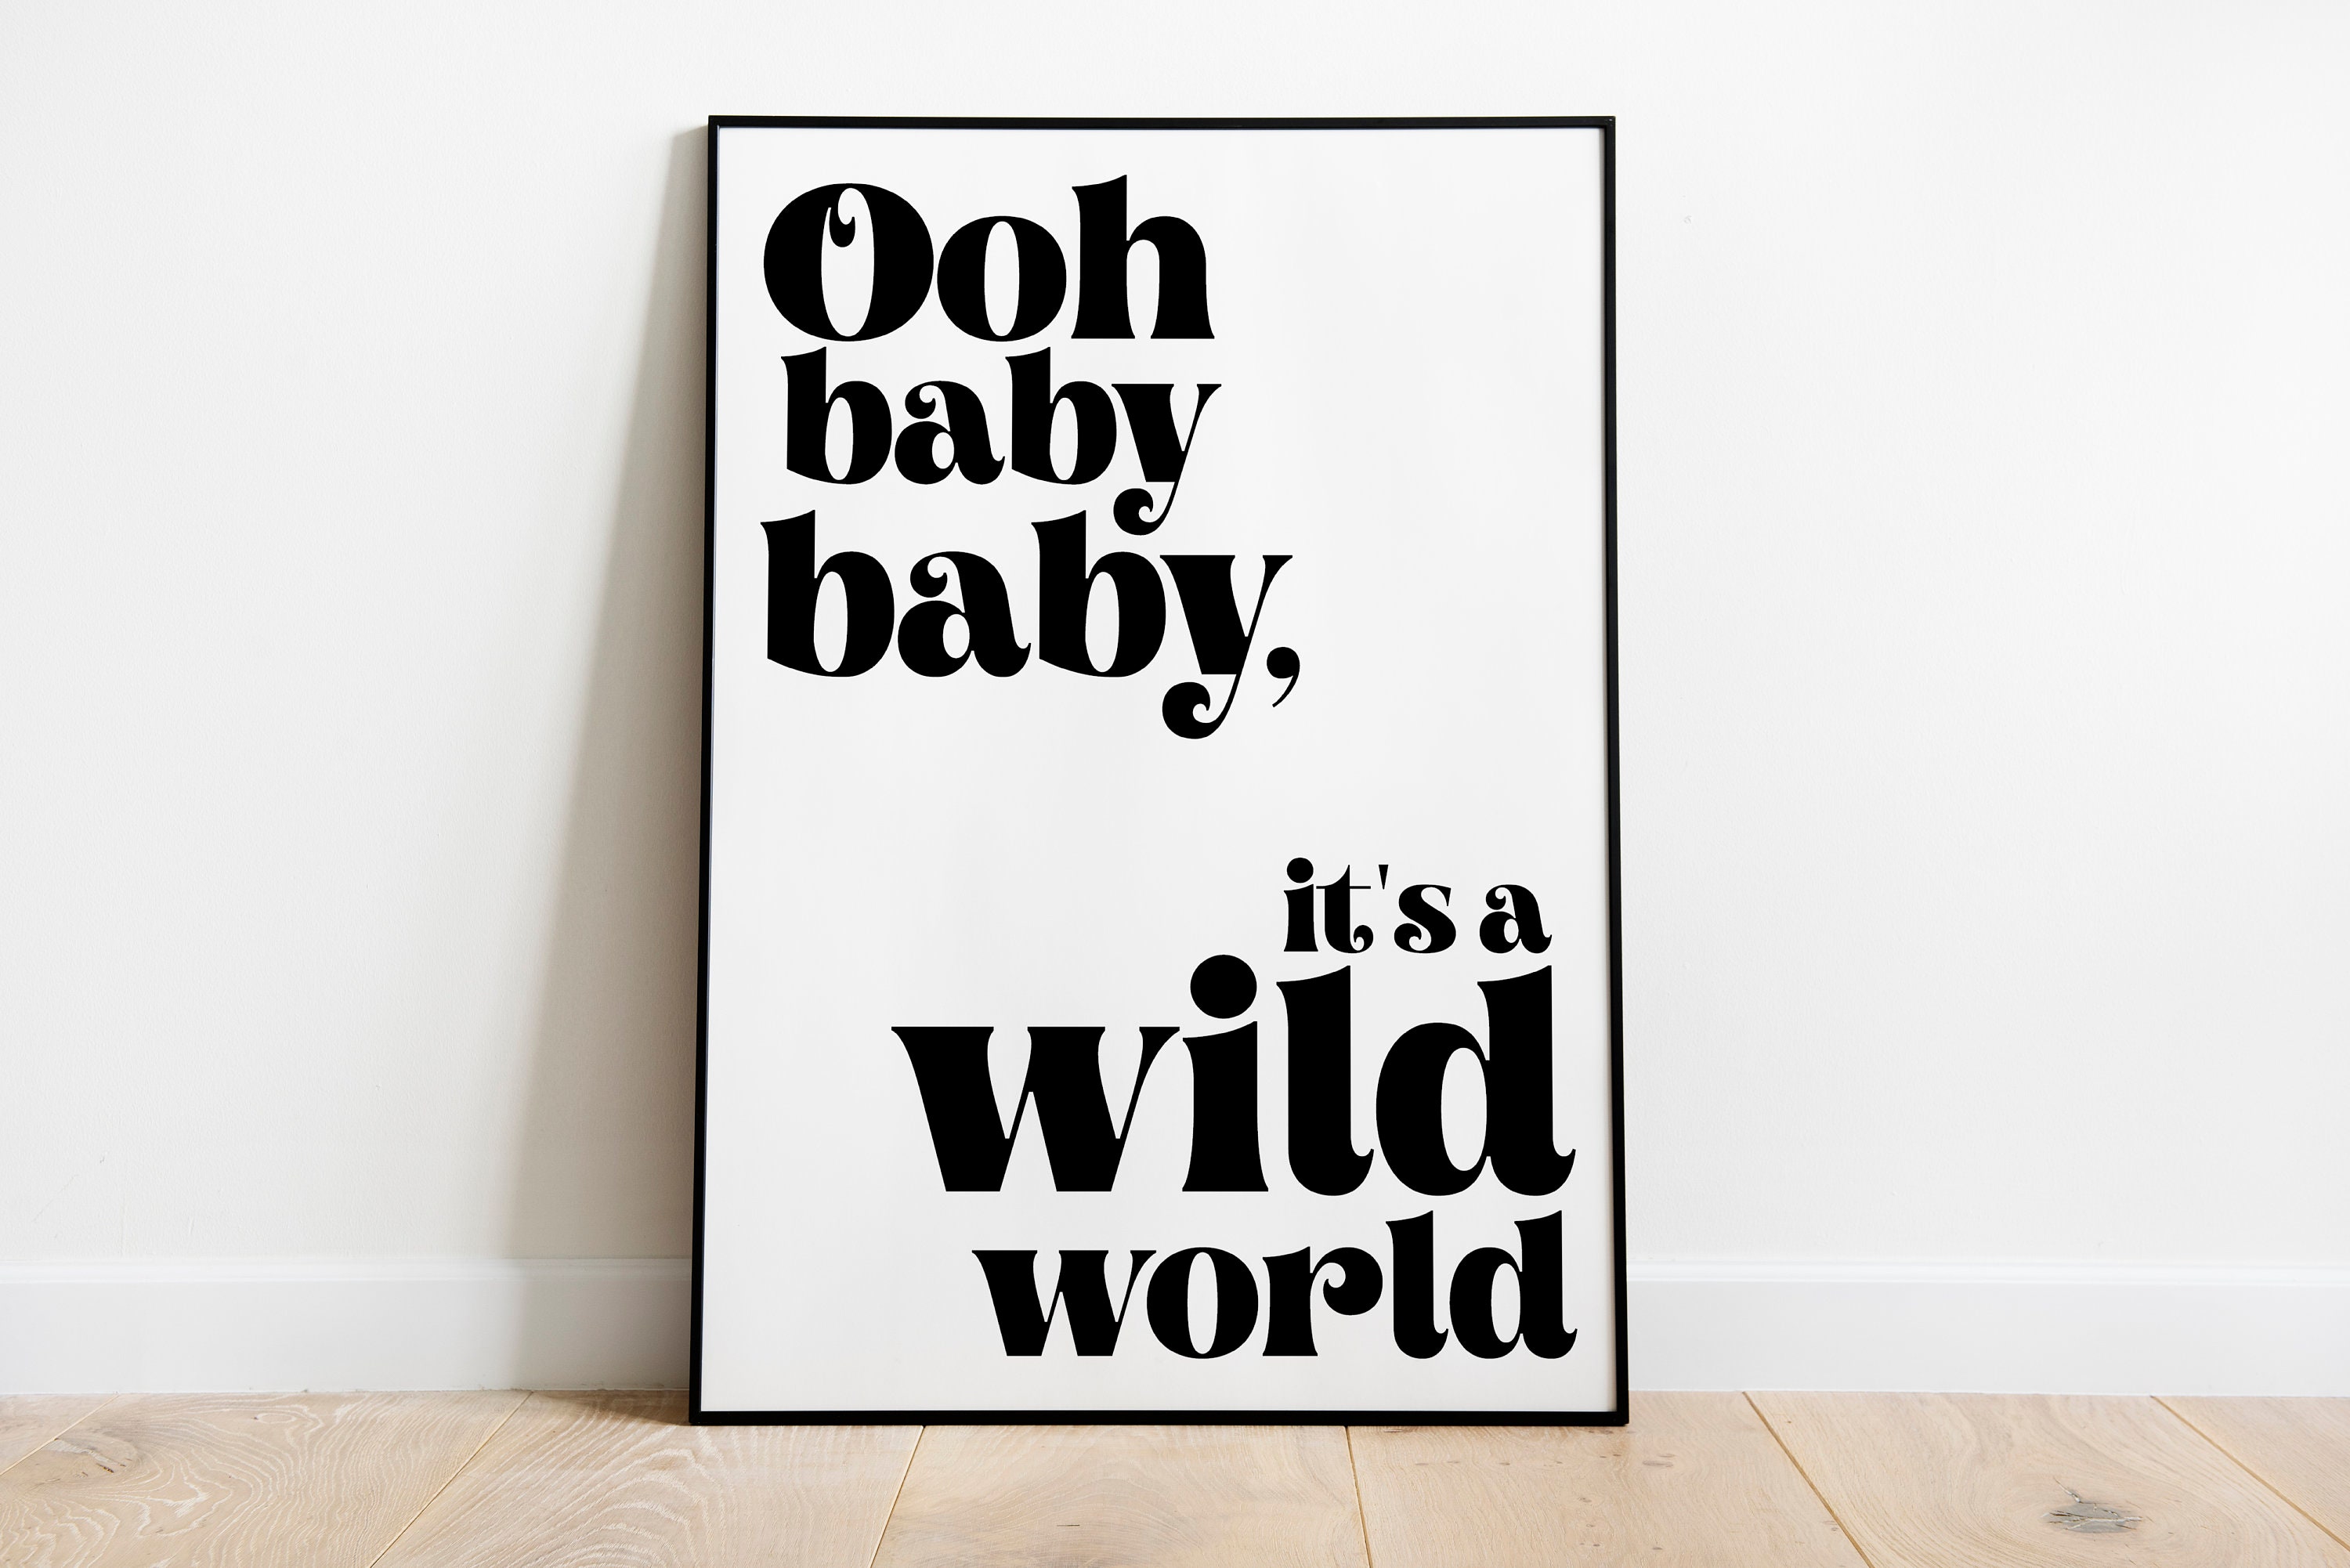 Picture Album - Oh Baby, it's a wild world! (Blue) 1 item